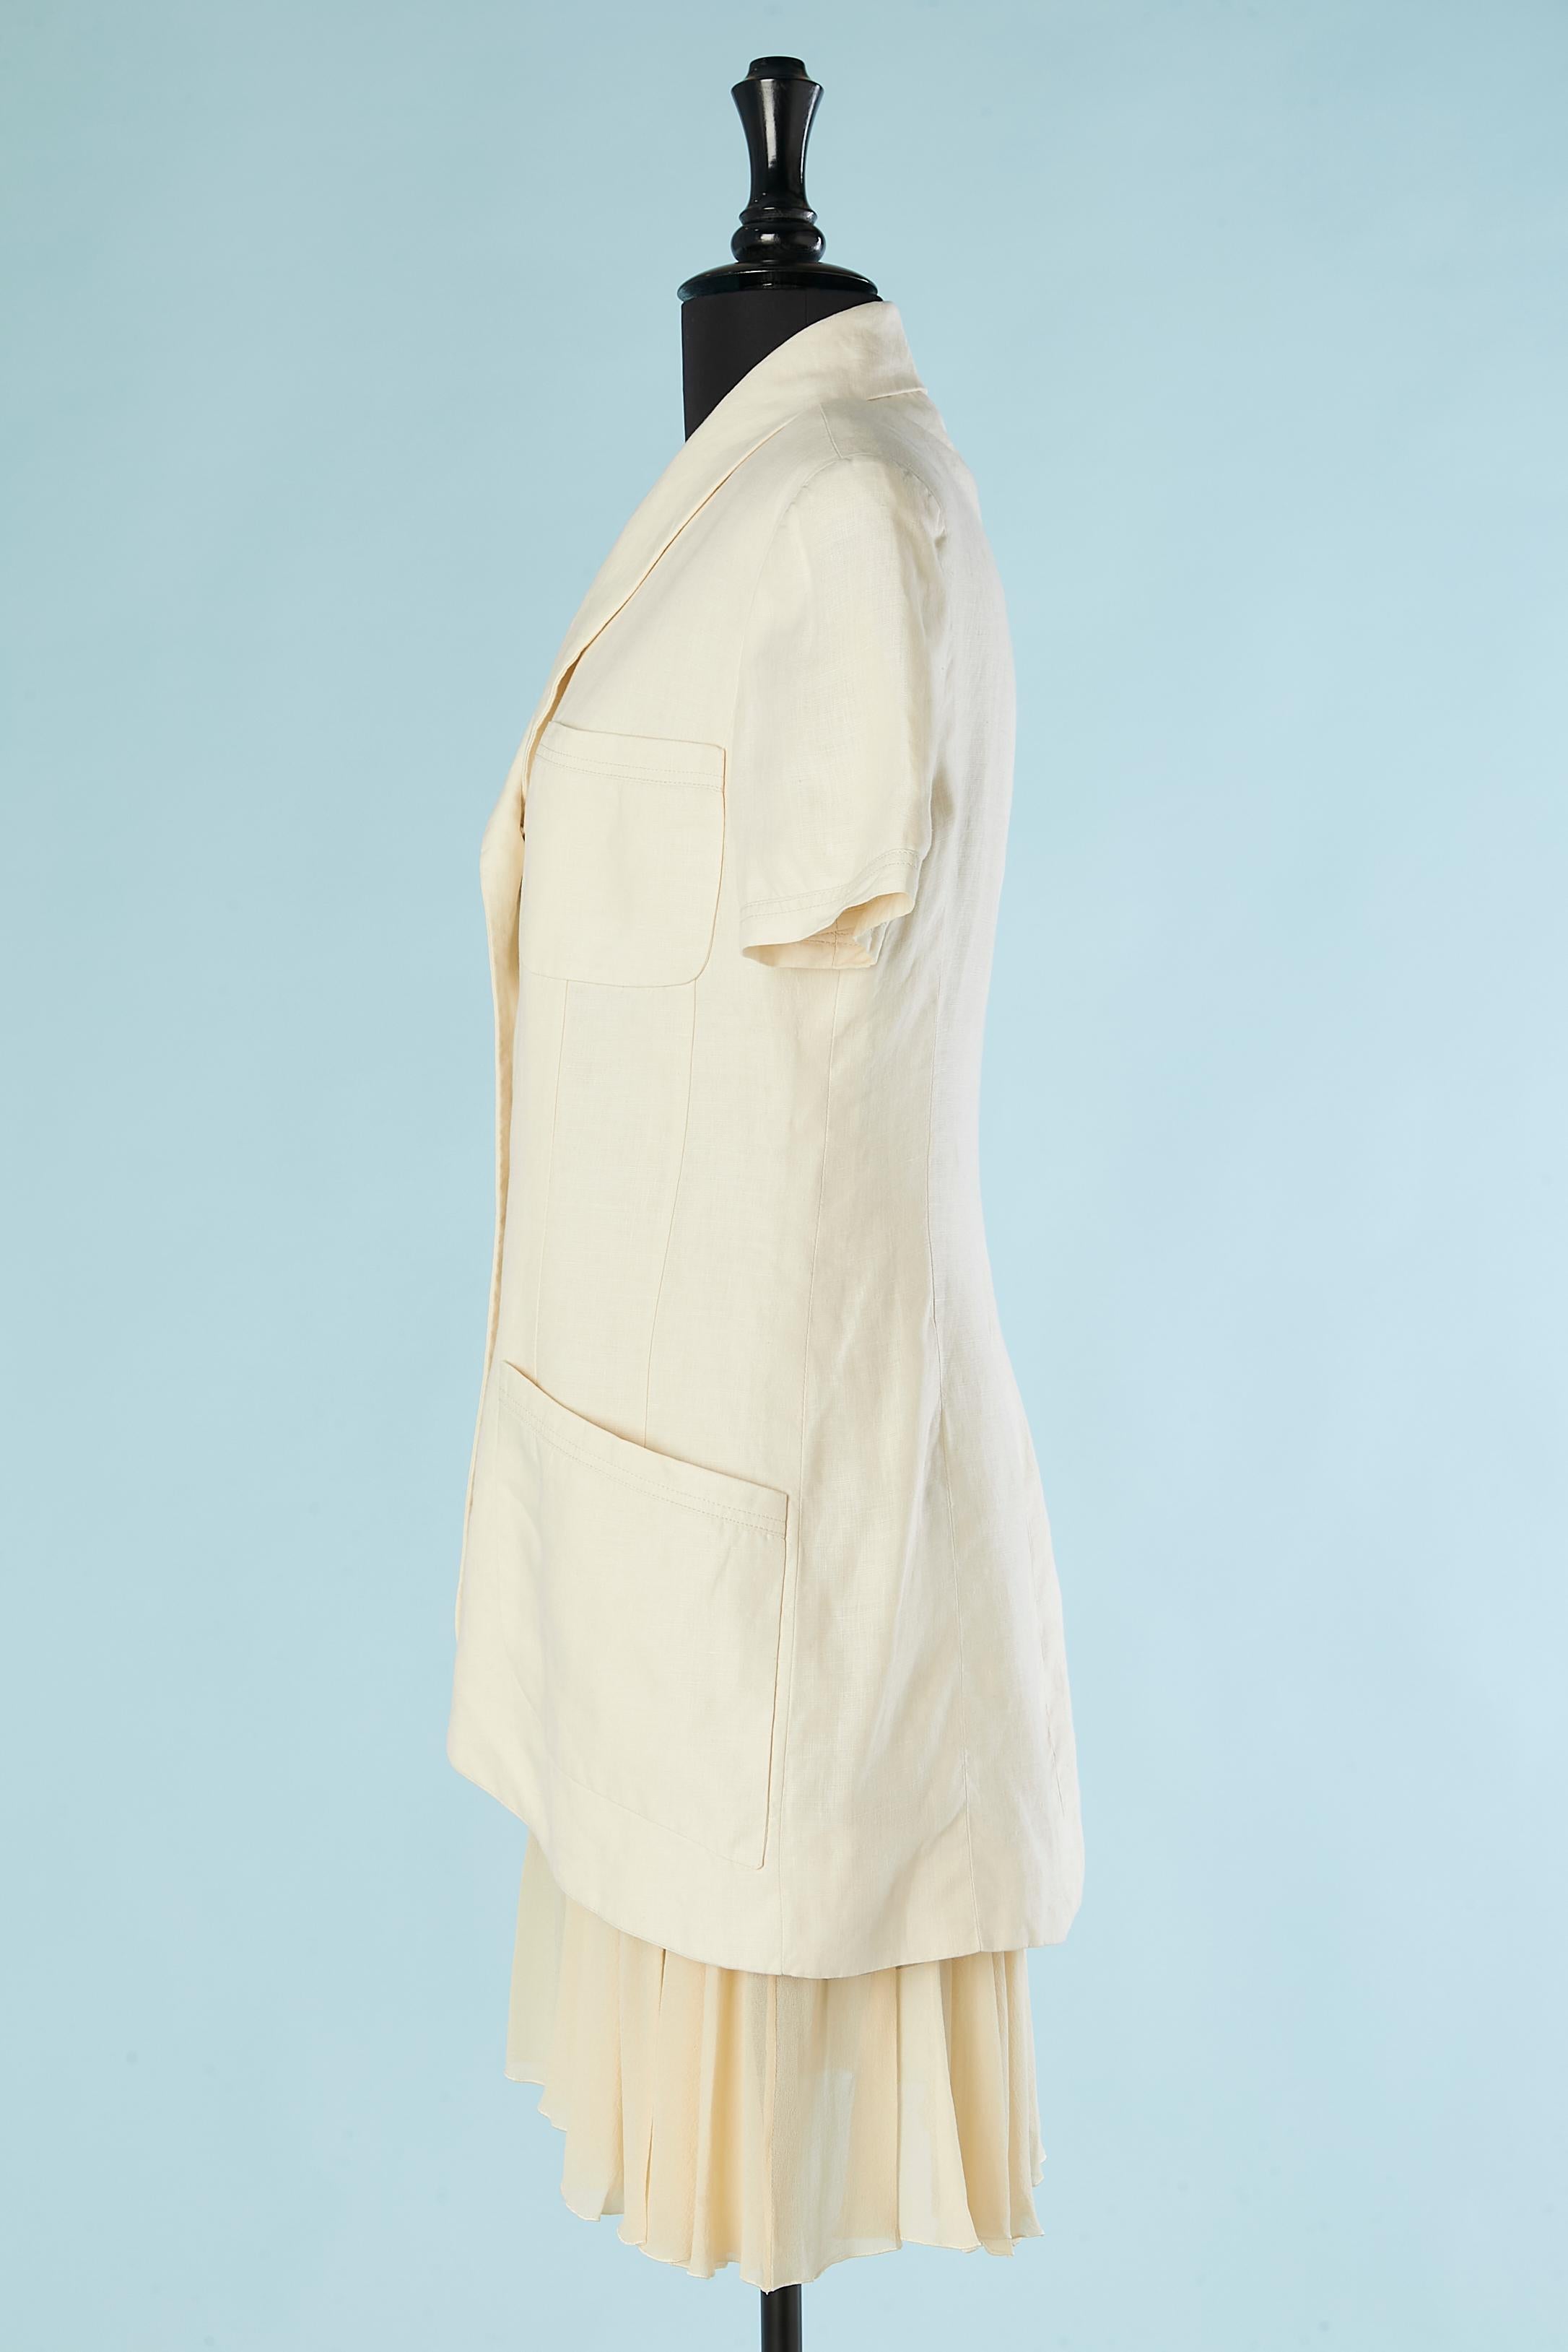 Women's Off-white linen and silk chiffon skirt-suit  Chanel Boutique  For Sale